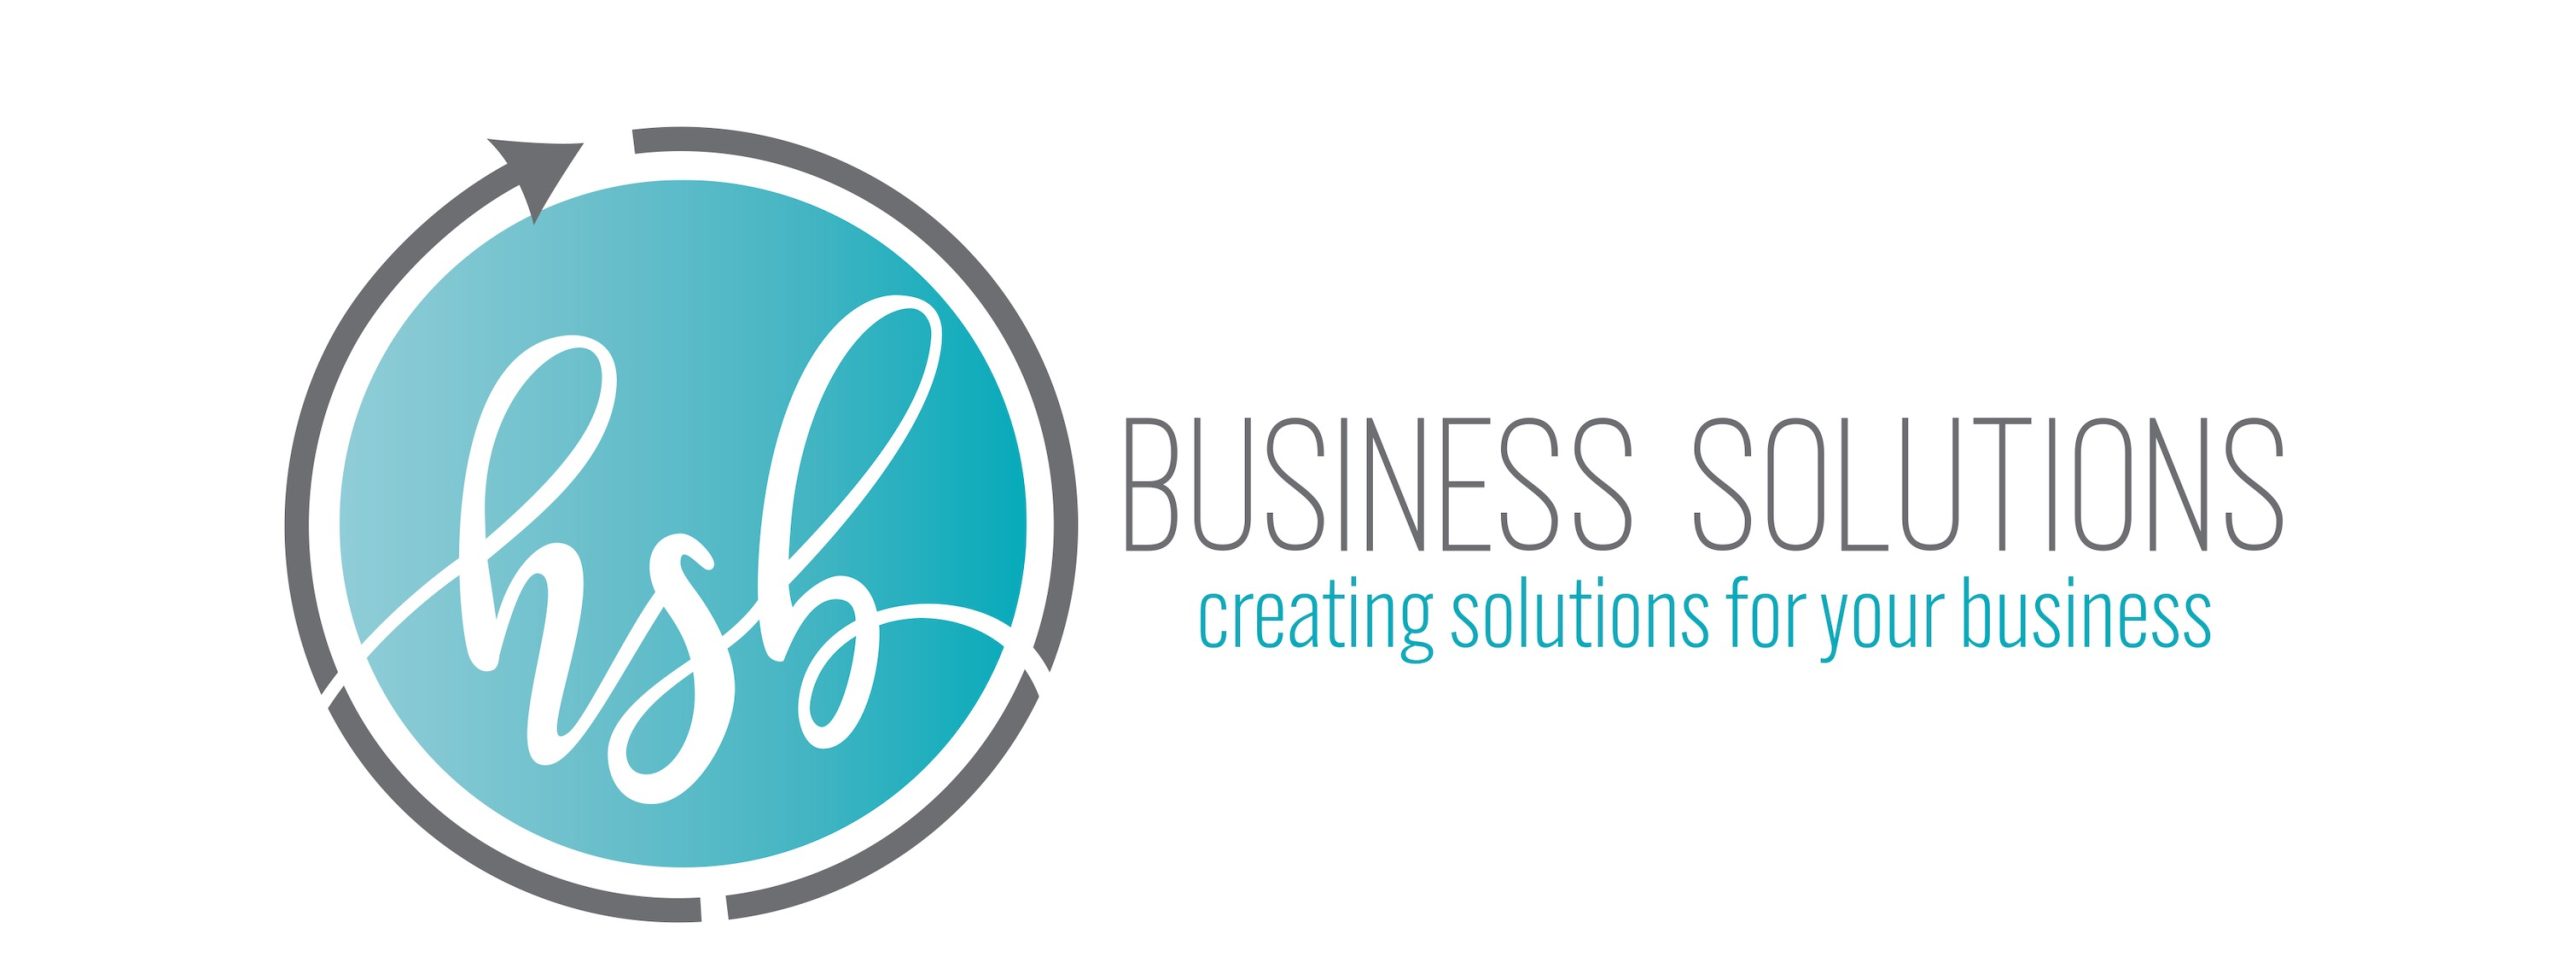 HSB Business Solutions